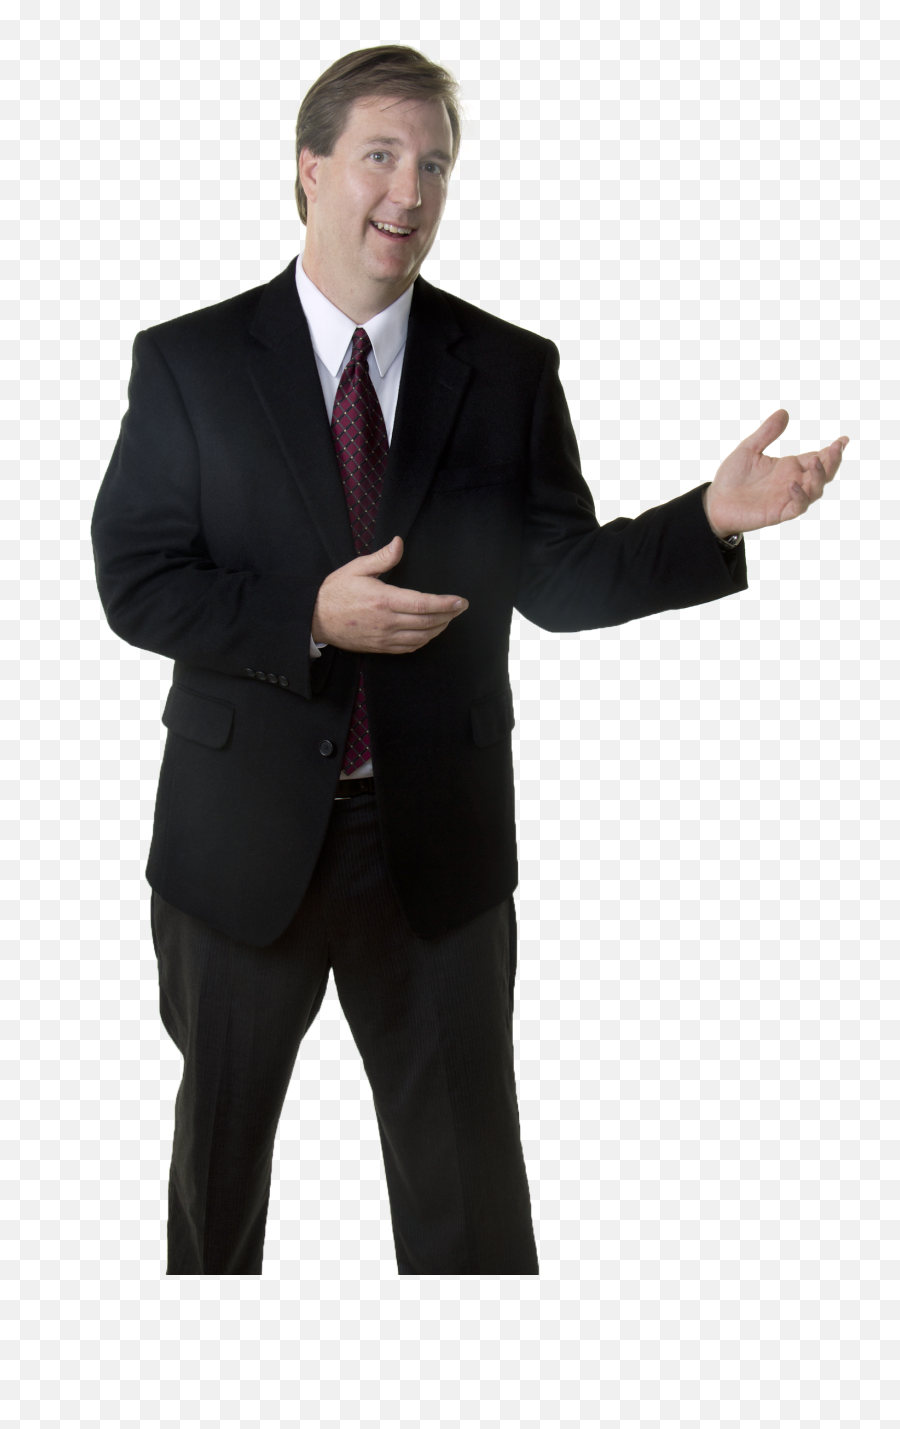 Download Business Man Png Image For Free - Man In Suit,Business Man Png